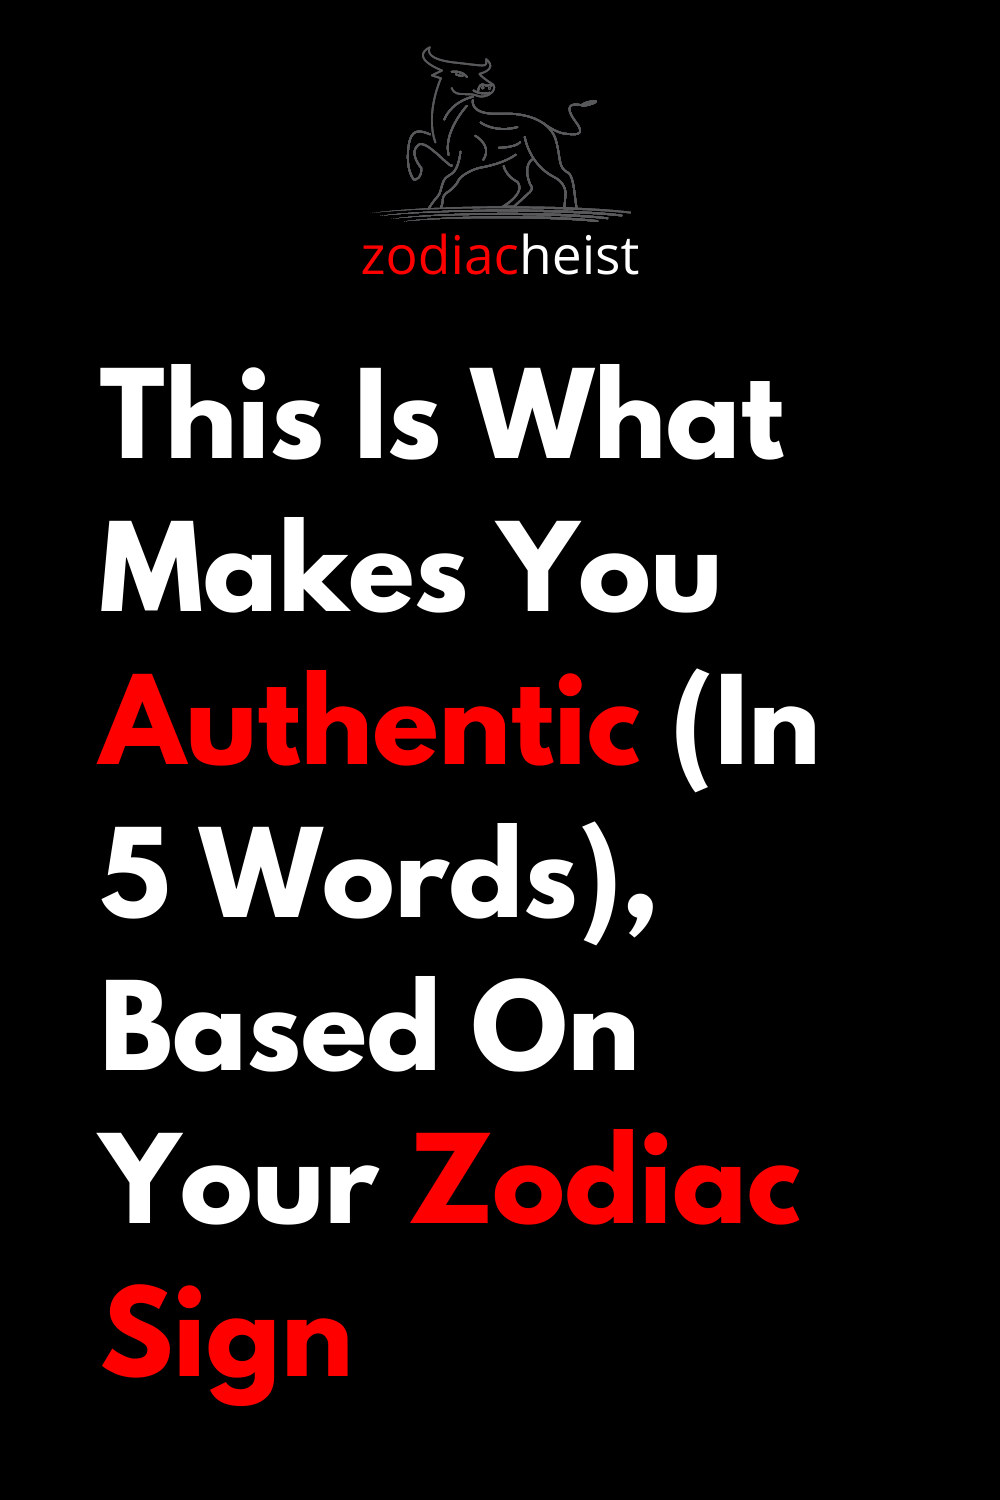 This Is What Makes You Authentic (In 5 Words), Based On Your Zodiac Sign